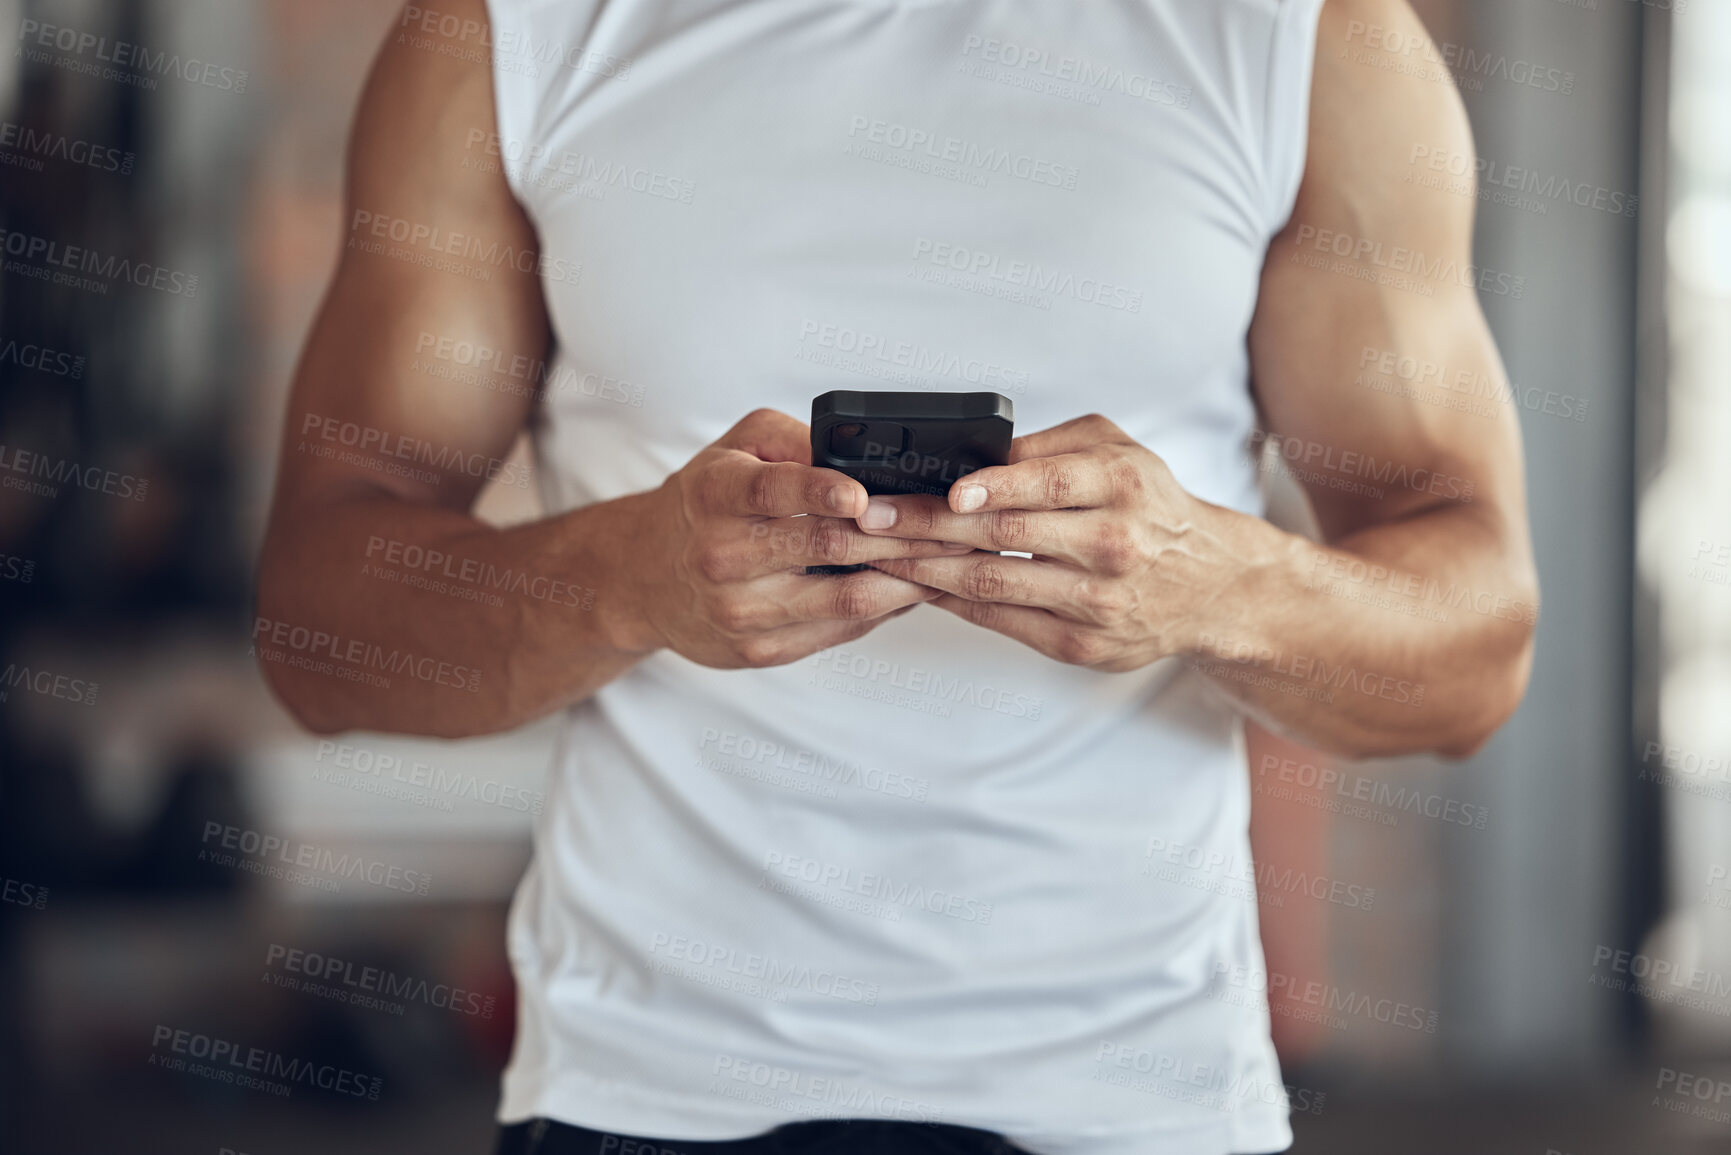 Buy stock photo Man using his cellphone in the gym. Man browsing an app online on his smartphone. Bodybuilder taking a break from working out to text on his cellphone. Athlete using his cellphone in the gym